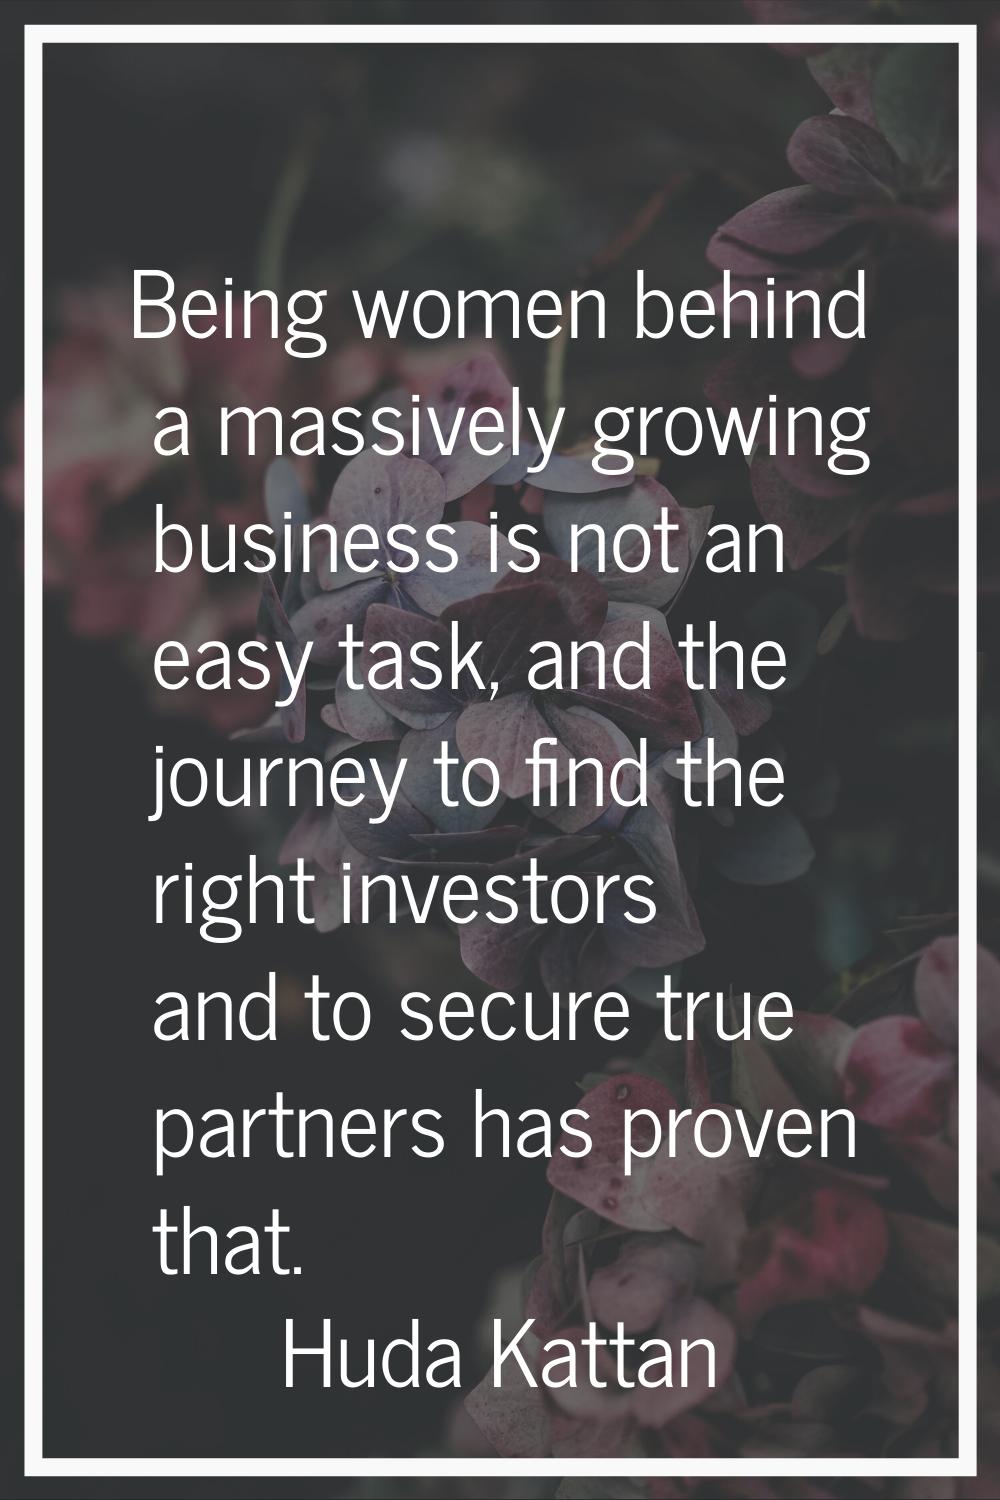 Being women behind a massively growing business is not an easy task, and the journey to find the ri